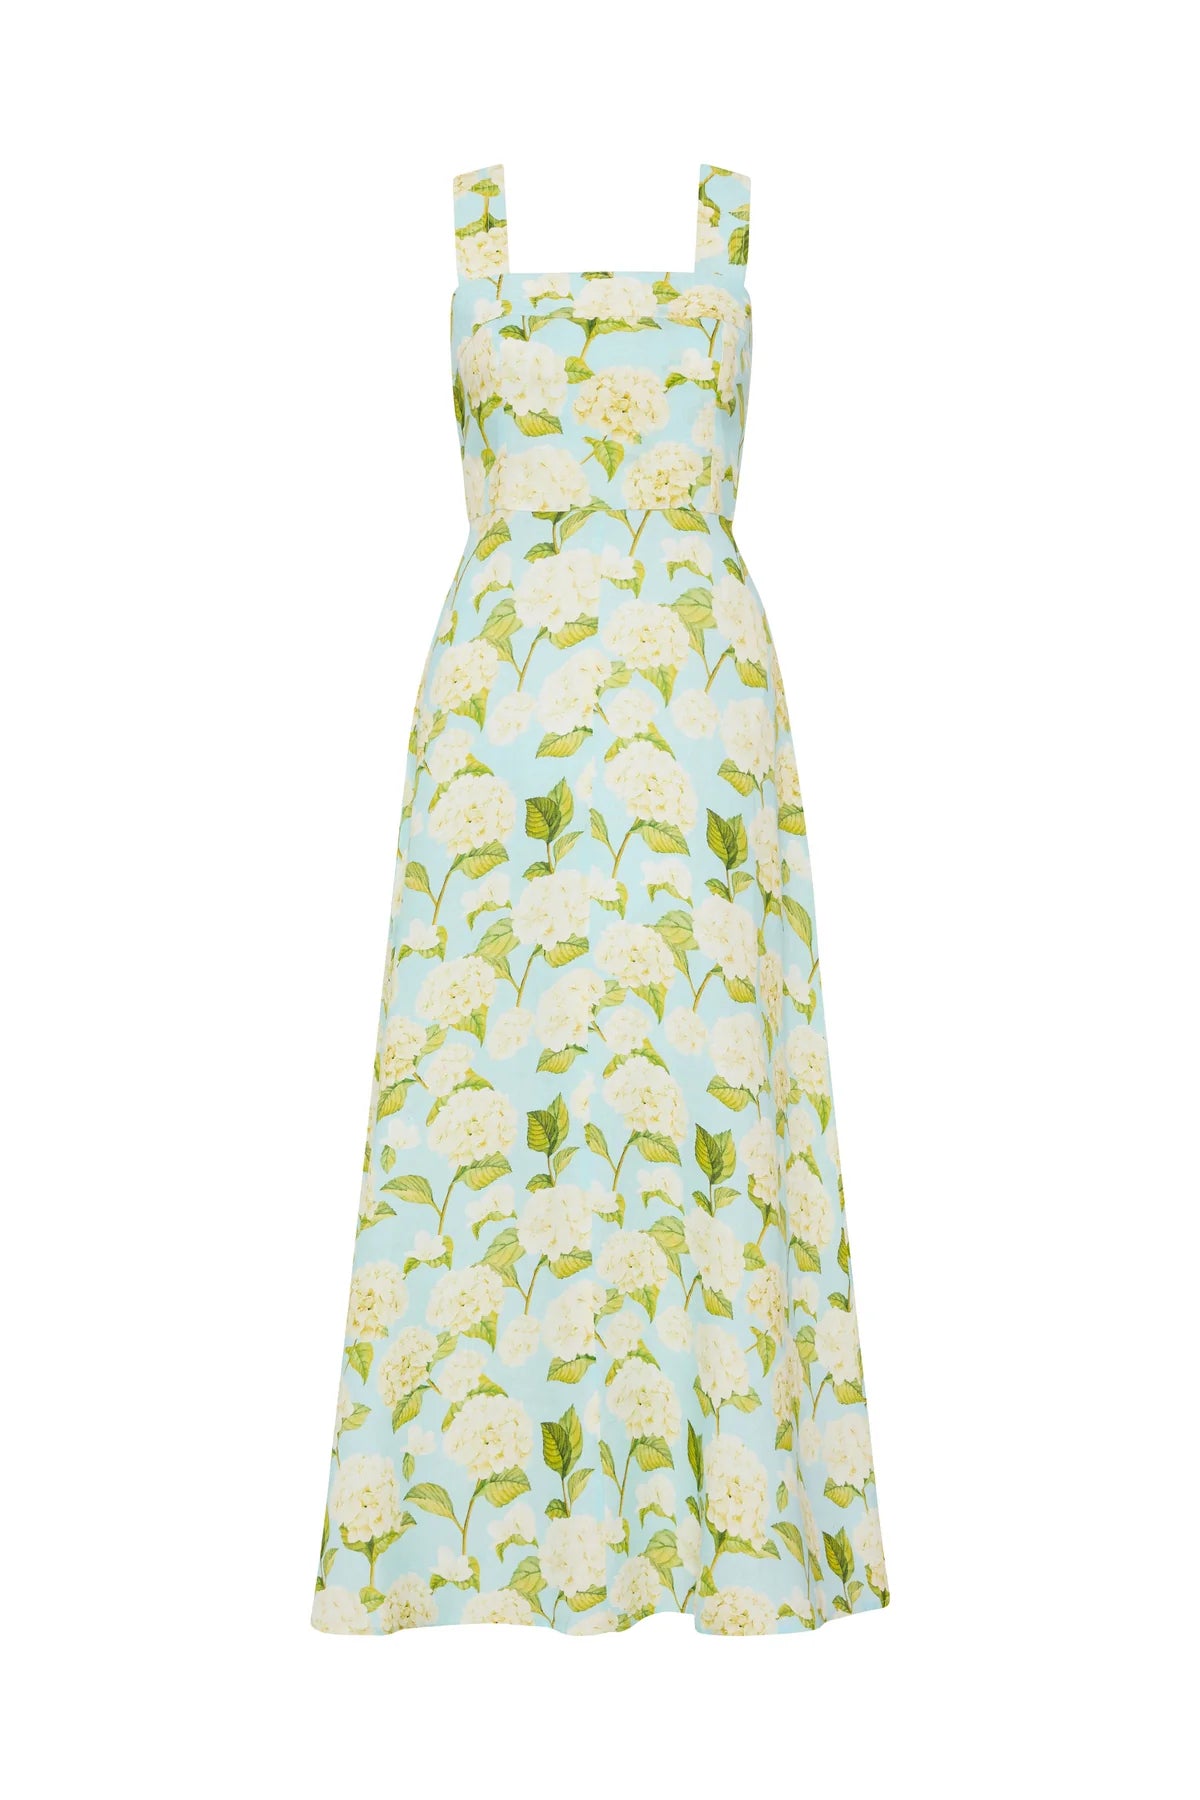 Linen dress with a fitted top and slightly A line skirt in White Hydrangea  print